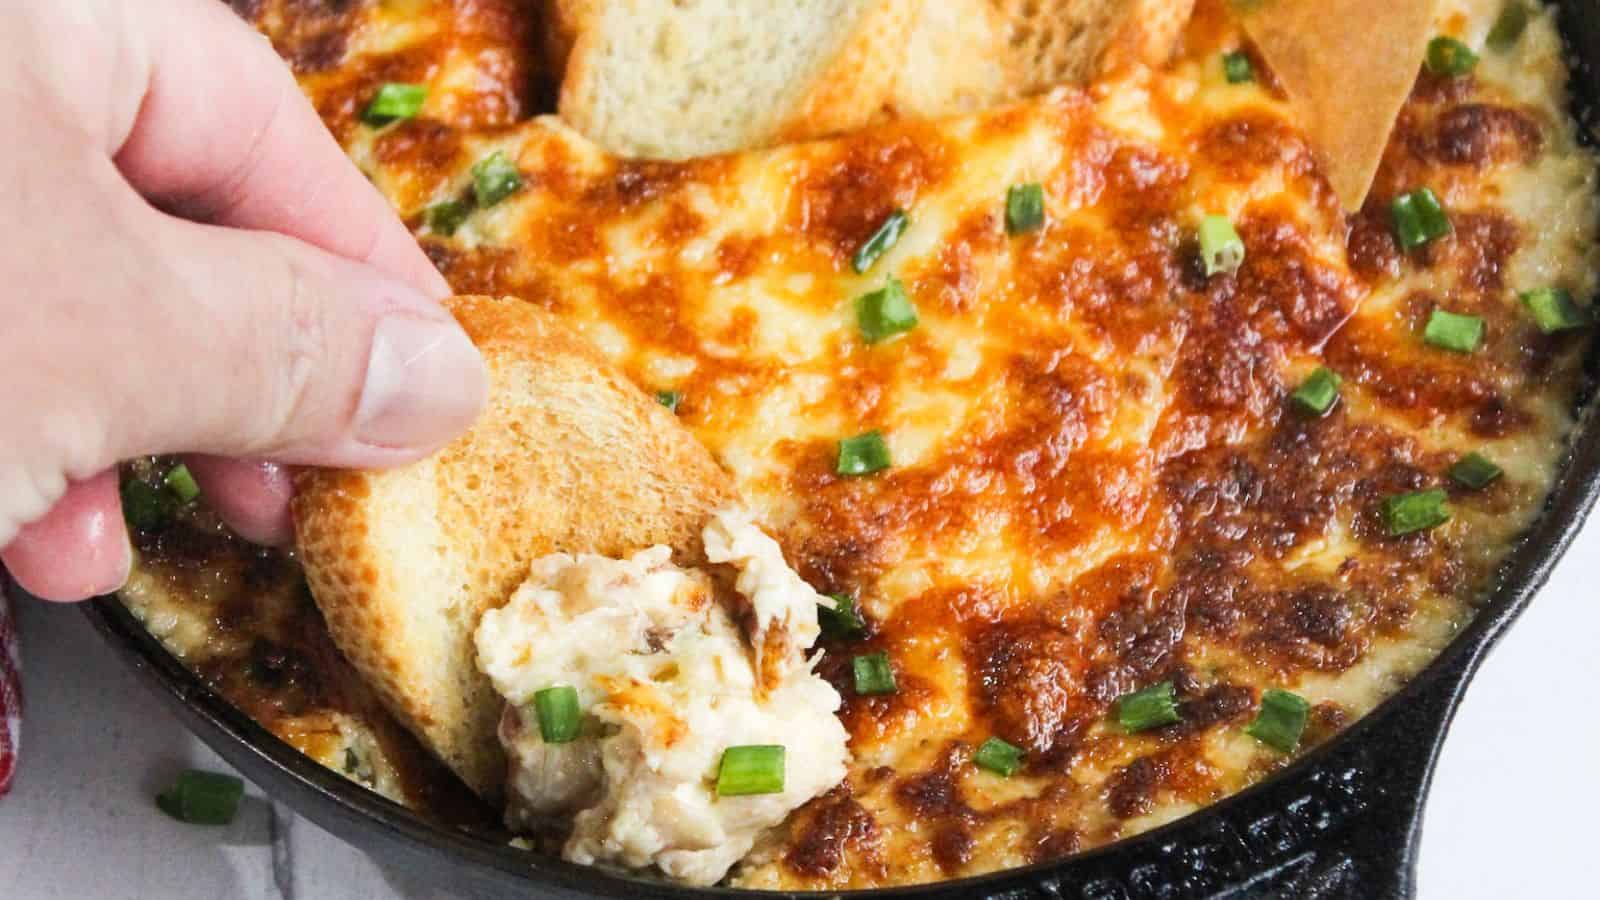 A person dipping a piece of bread into a skillet of cheesy dip.